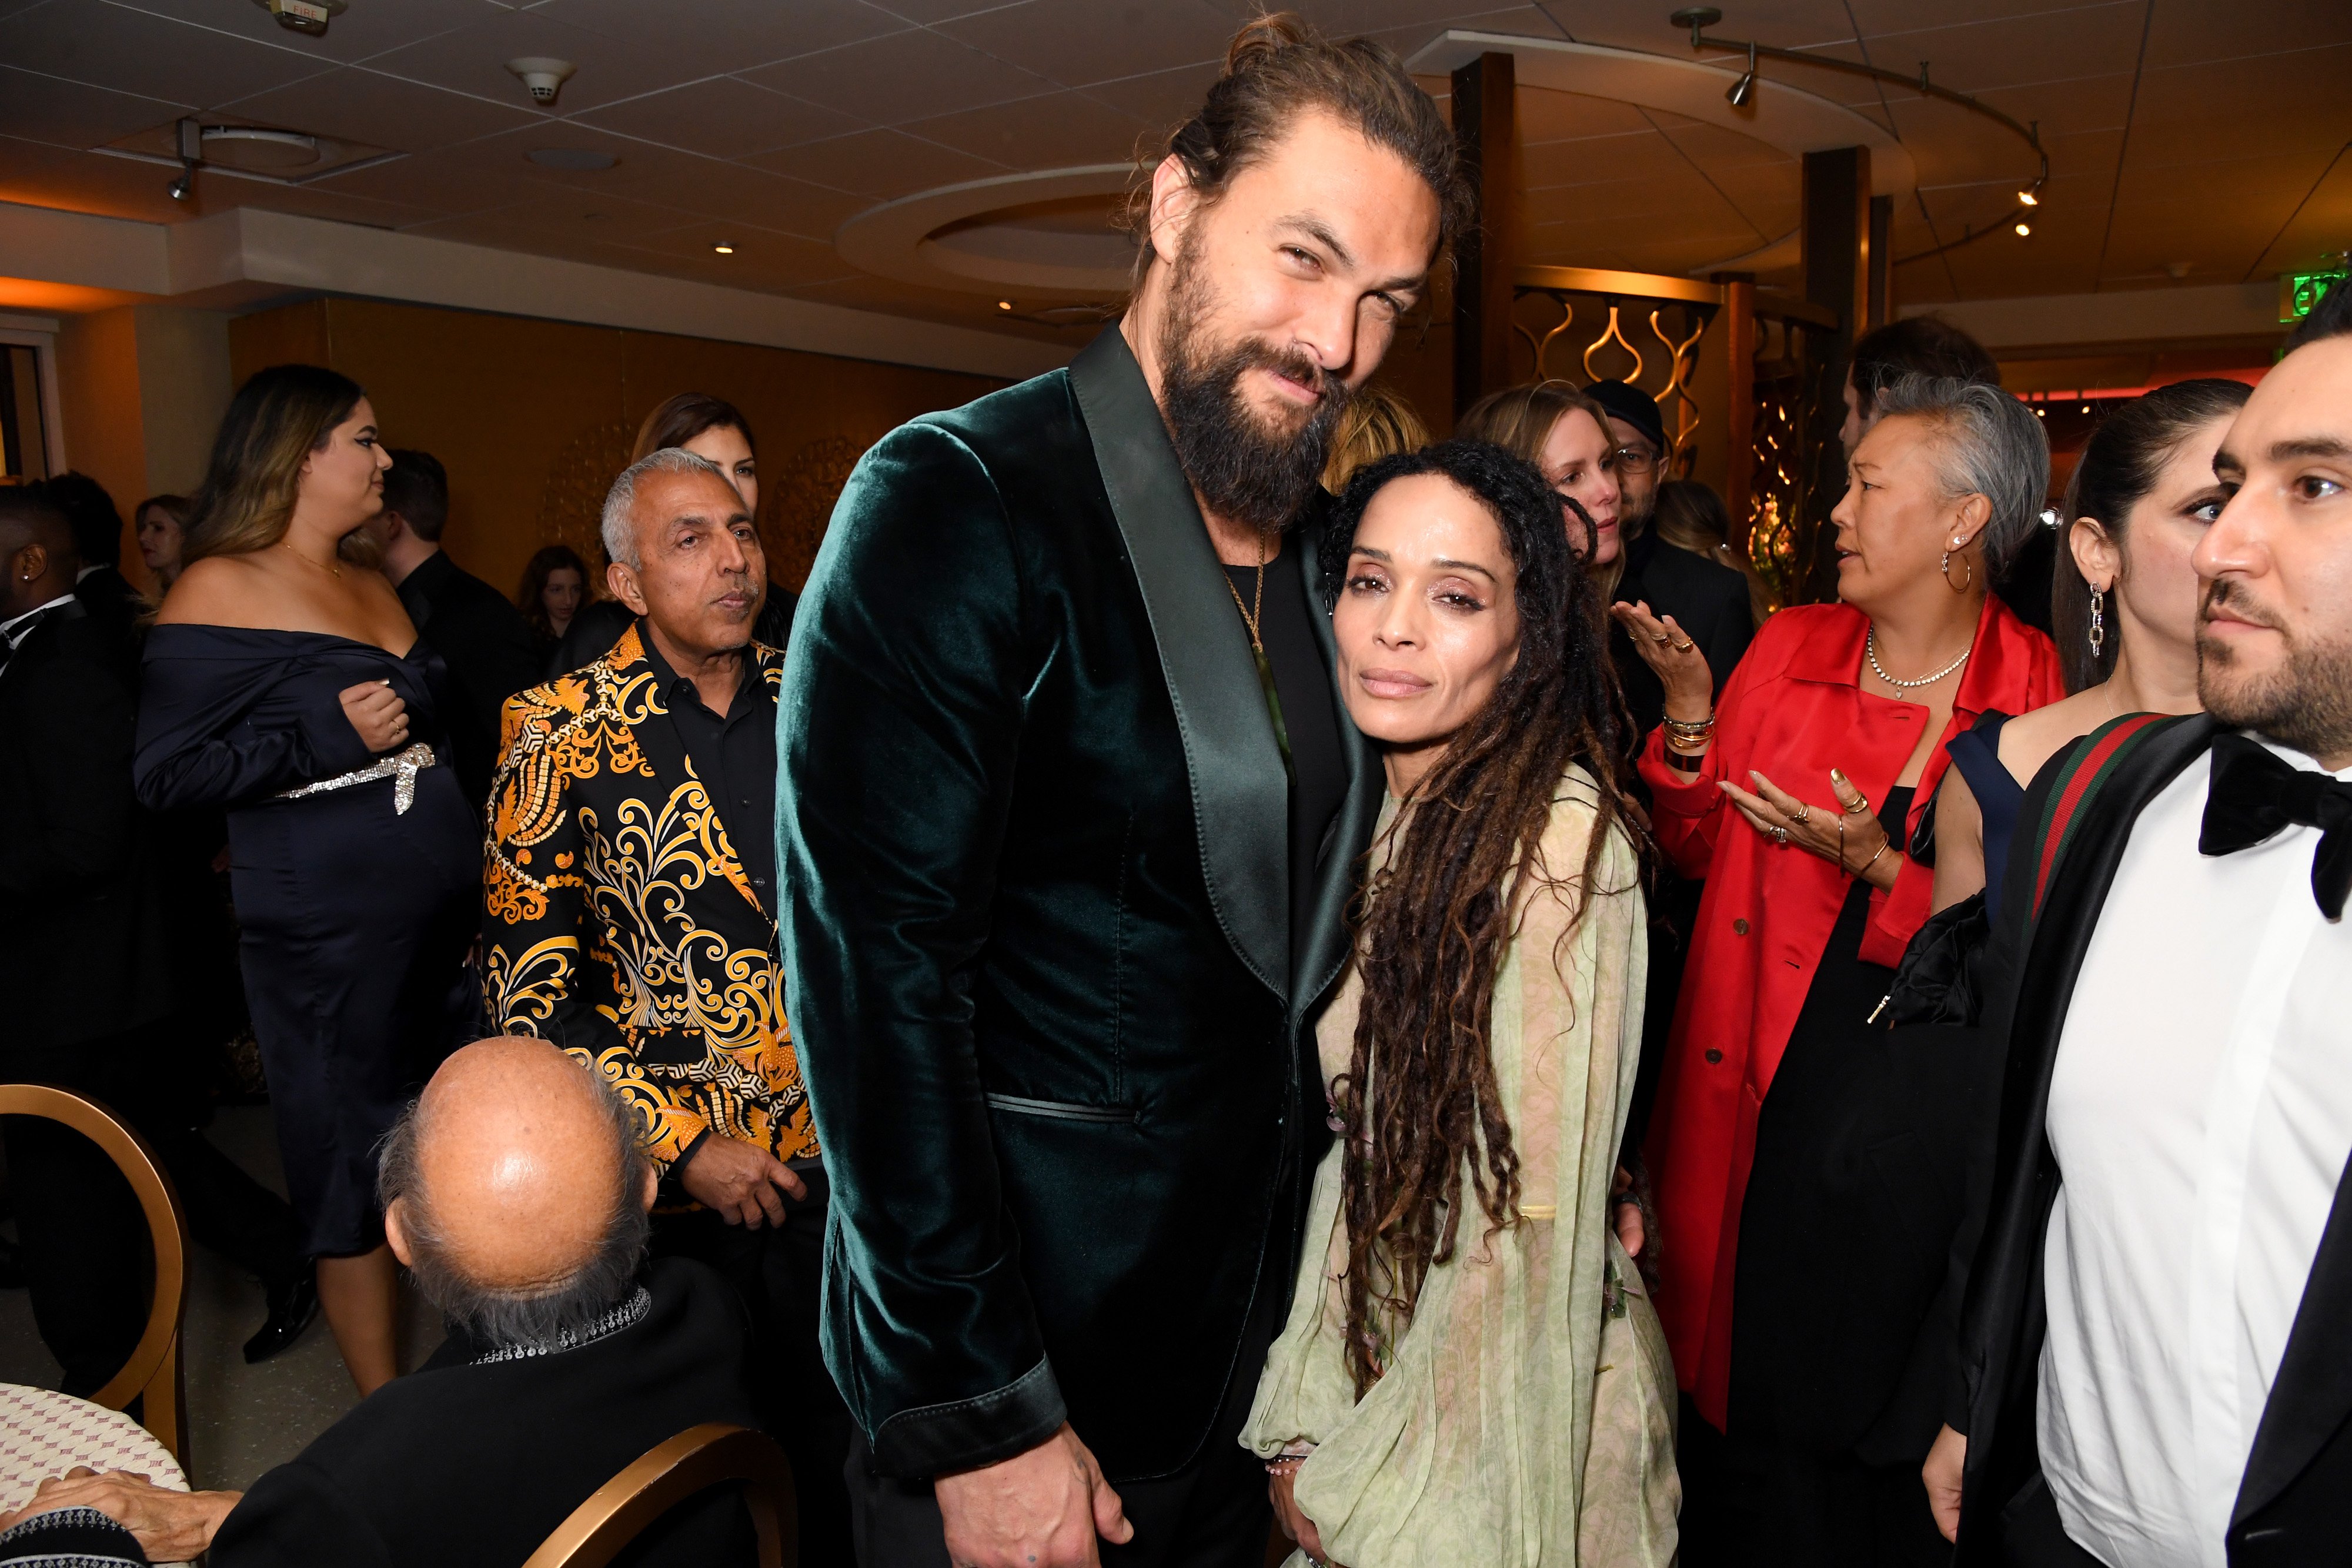  Jason Momoa and Lisa Bonet attend HBO's Official 2020 Golden Globe Awards After Party on January 05, 2020 in Los Angeles, California. | Source: Getty Images